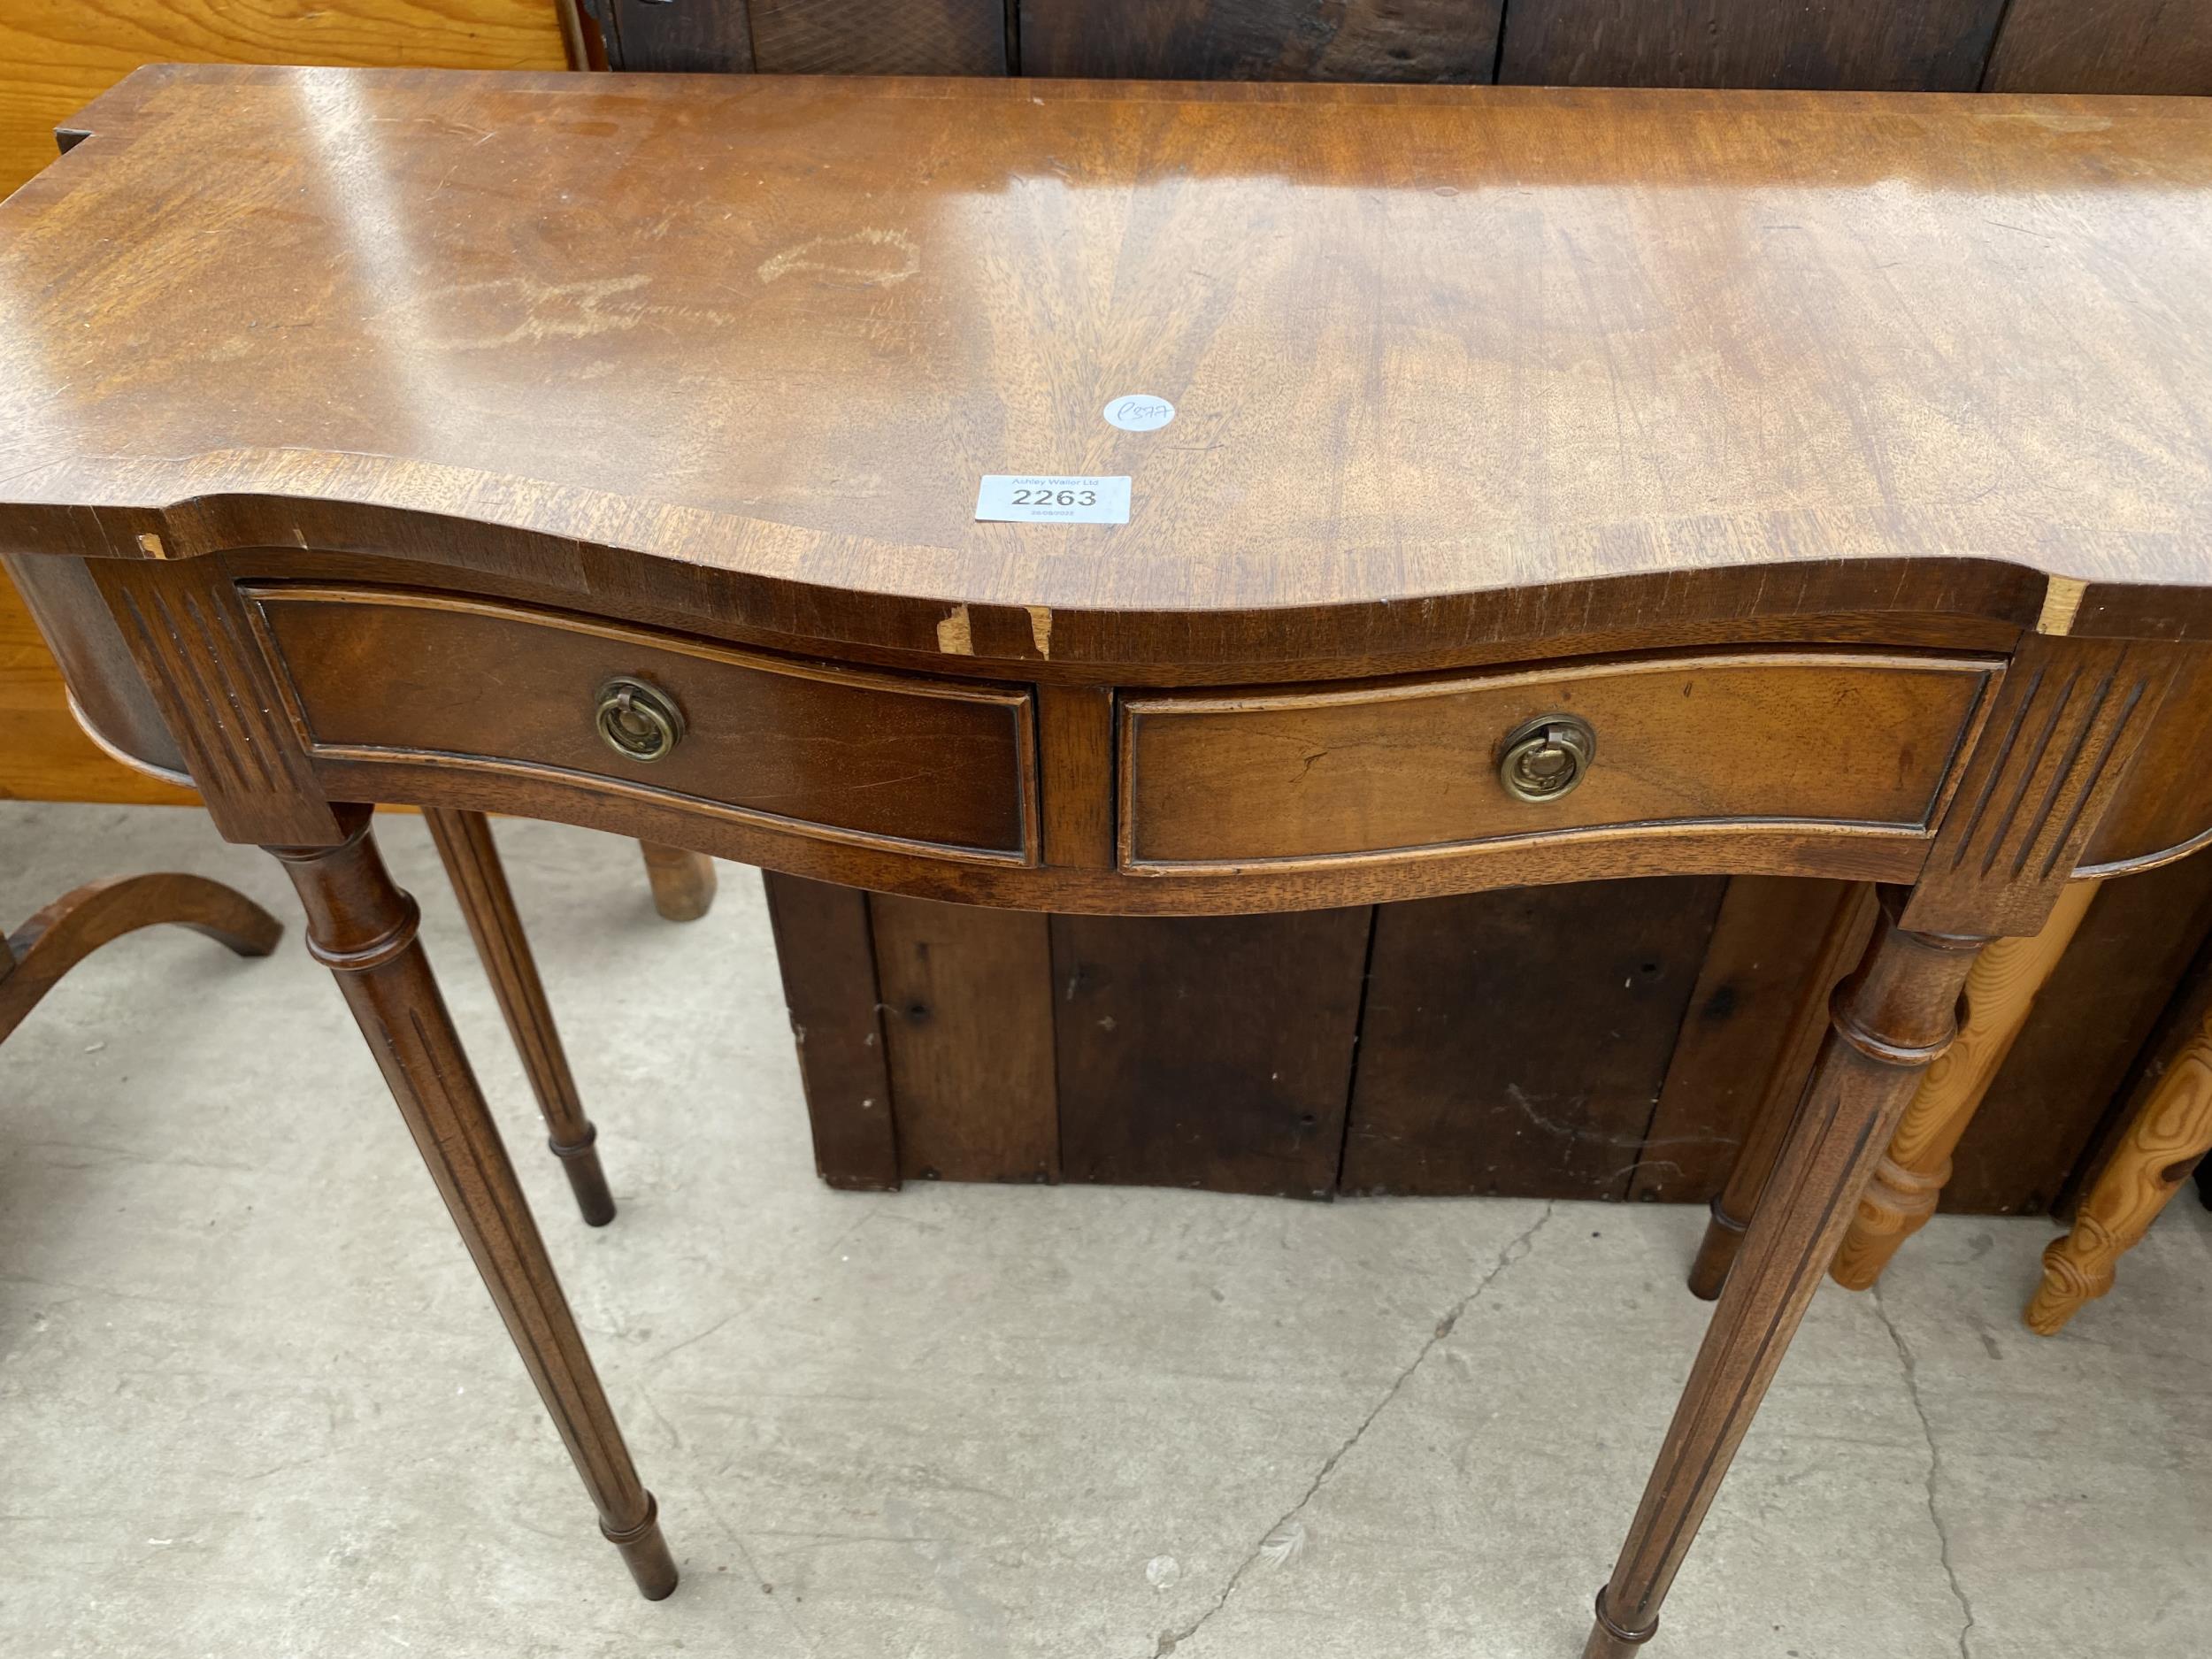 A REPRODUCTION MAHOGANY AND CROSSBAND SIDE TABLE WITH TWO DRAWERS 31" WIDE - Image 5 of 5